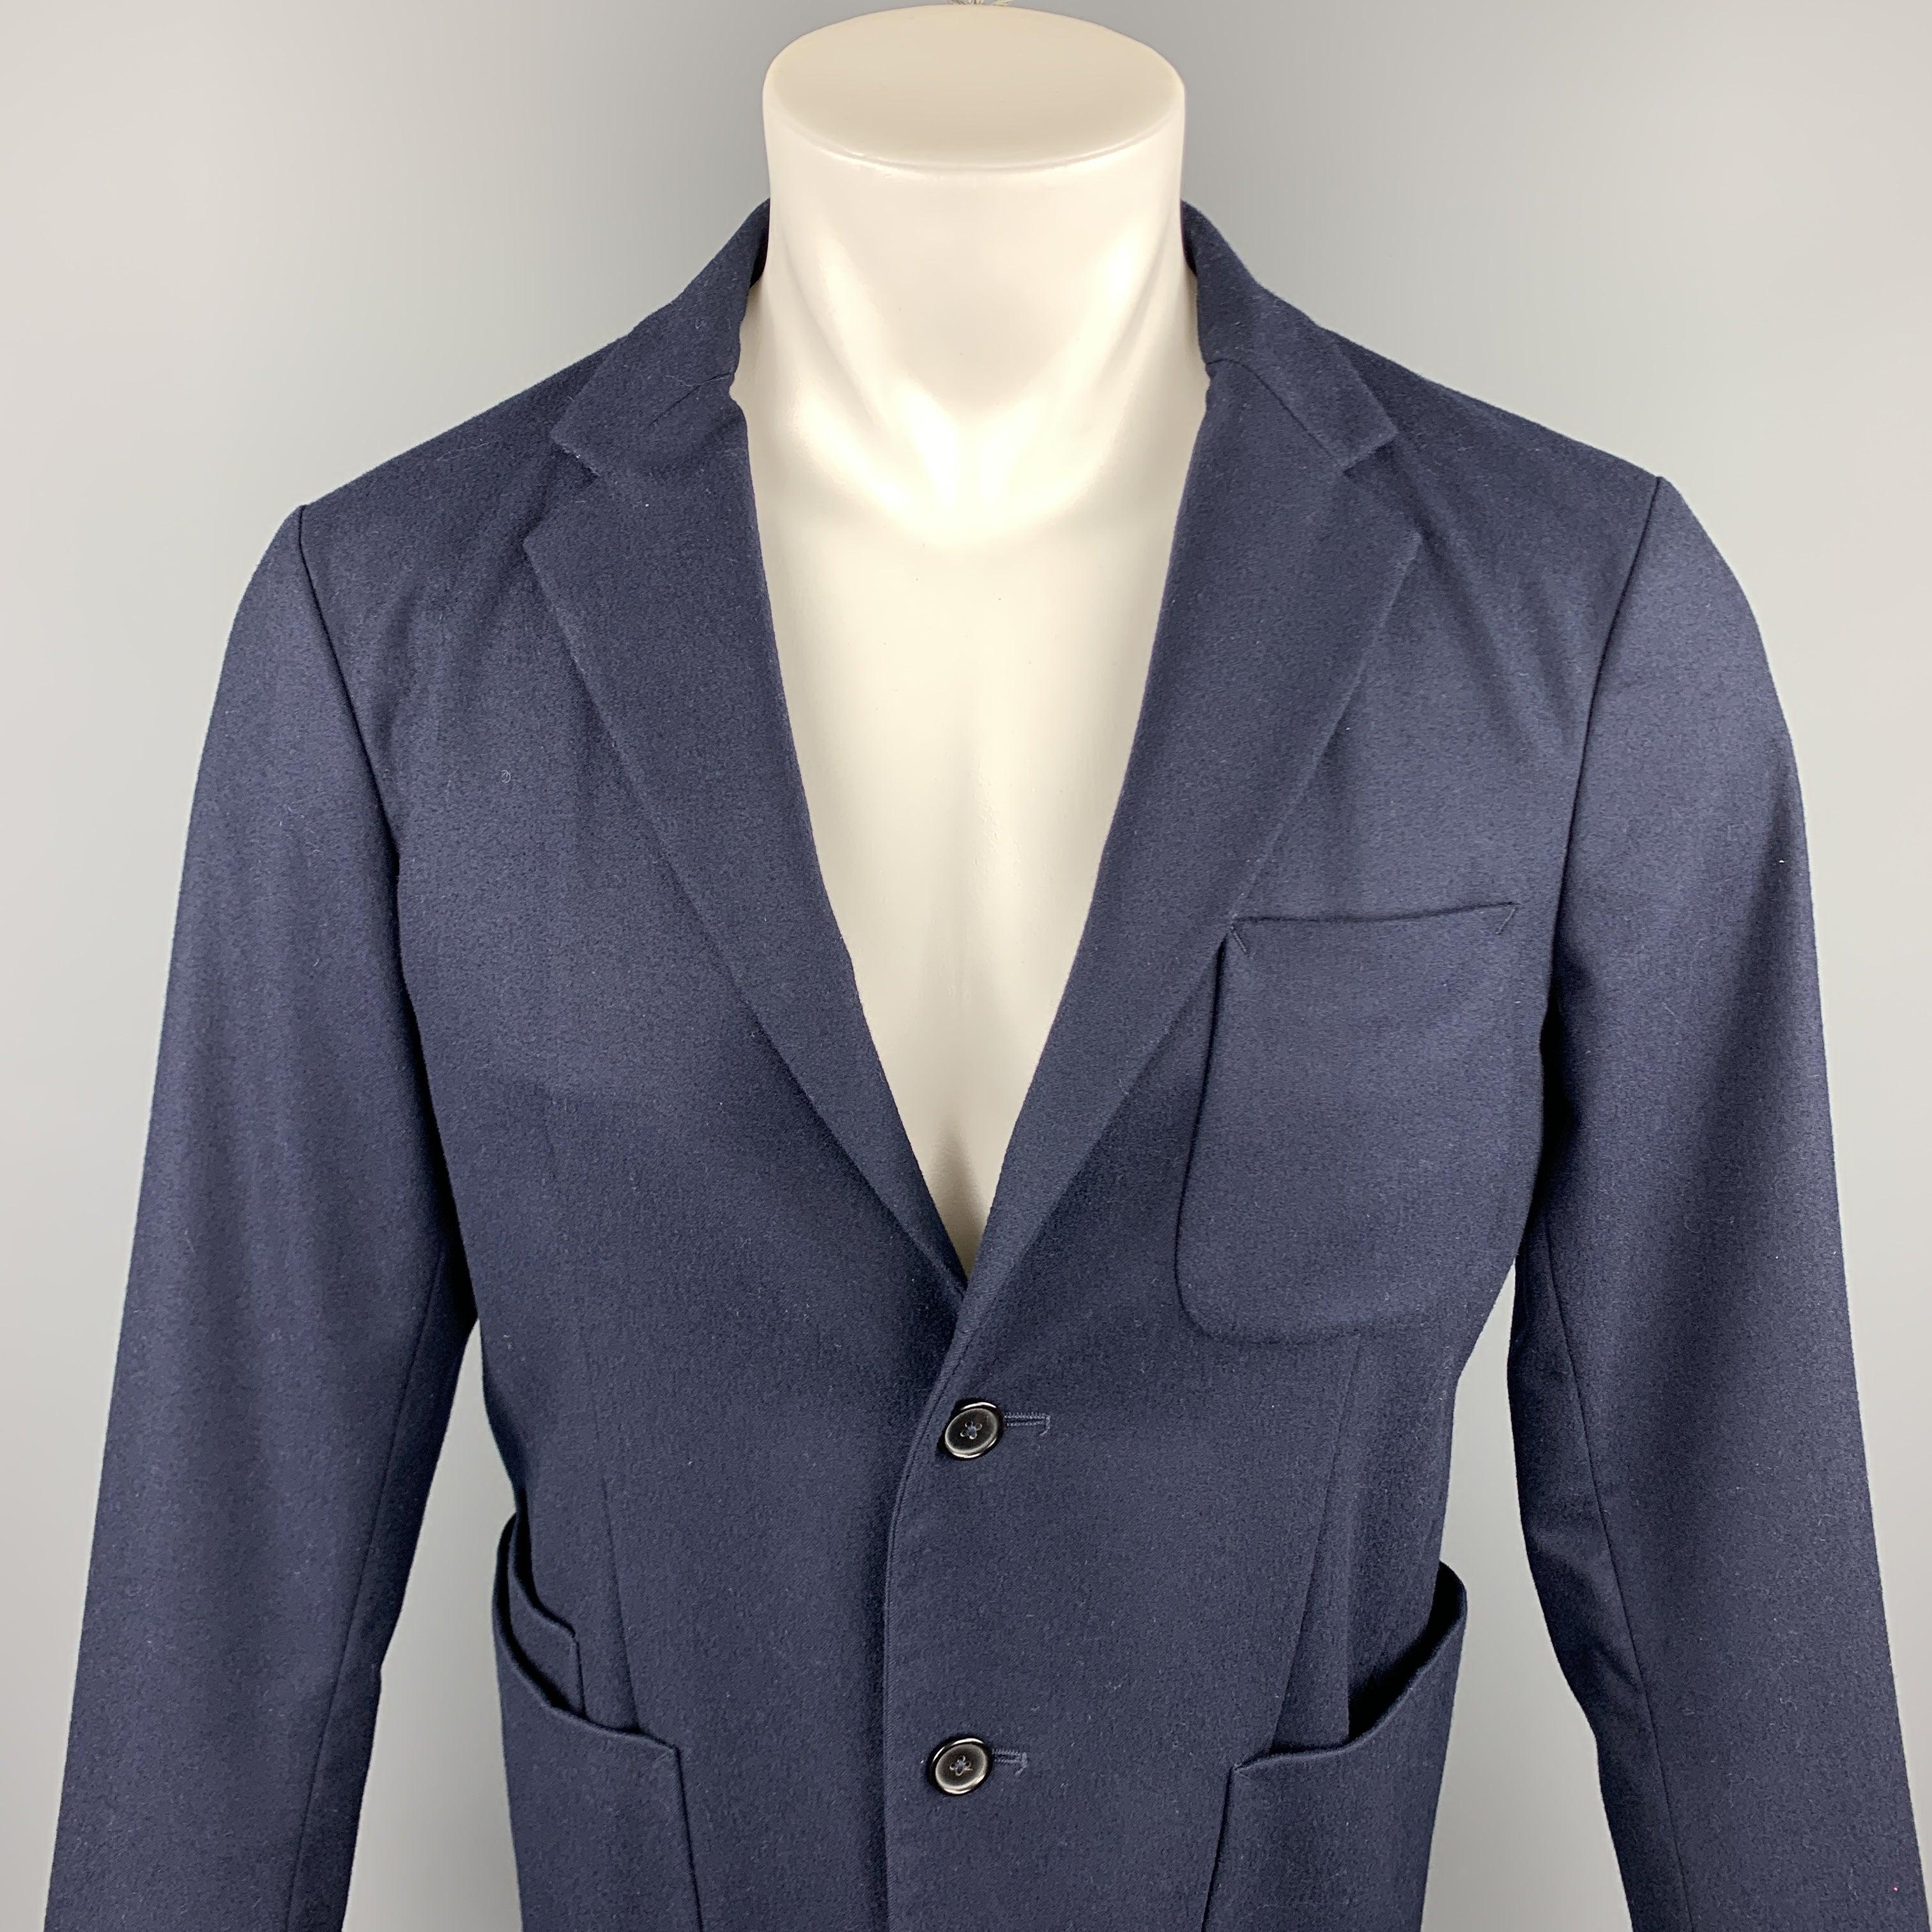 JIL SANDER sport coat comes in a navy wool with a black neoprene back featuring a notch lapel style, patch pockets, and a two button closure. Made in Italy.Excellent
Pre-Owned Condition. 

Marked:   IT 48 

Measurements: 
 
Shoulder: 17.5 inches